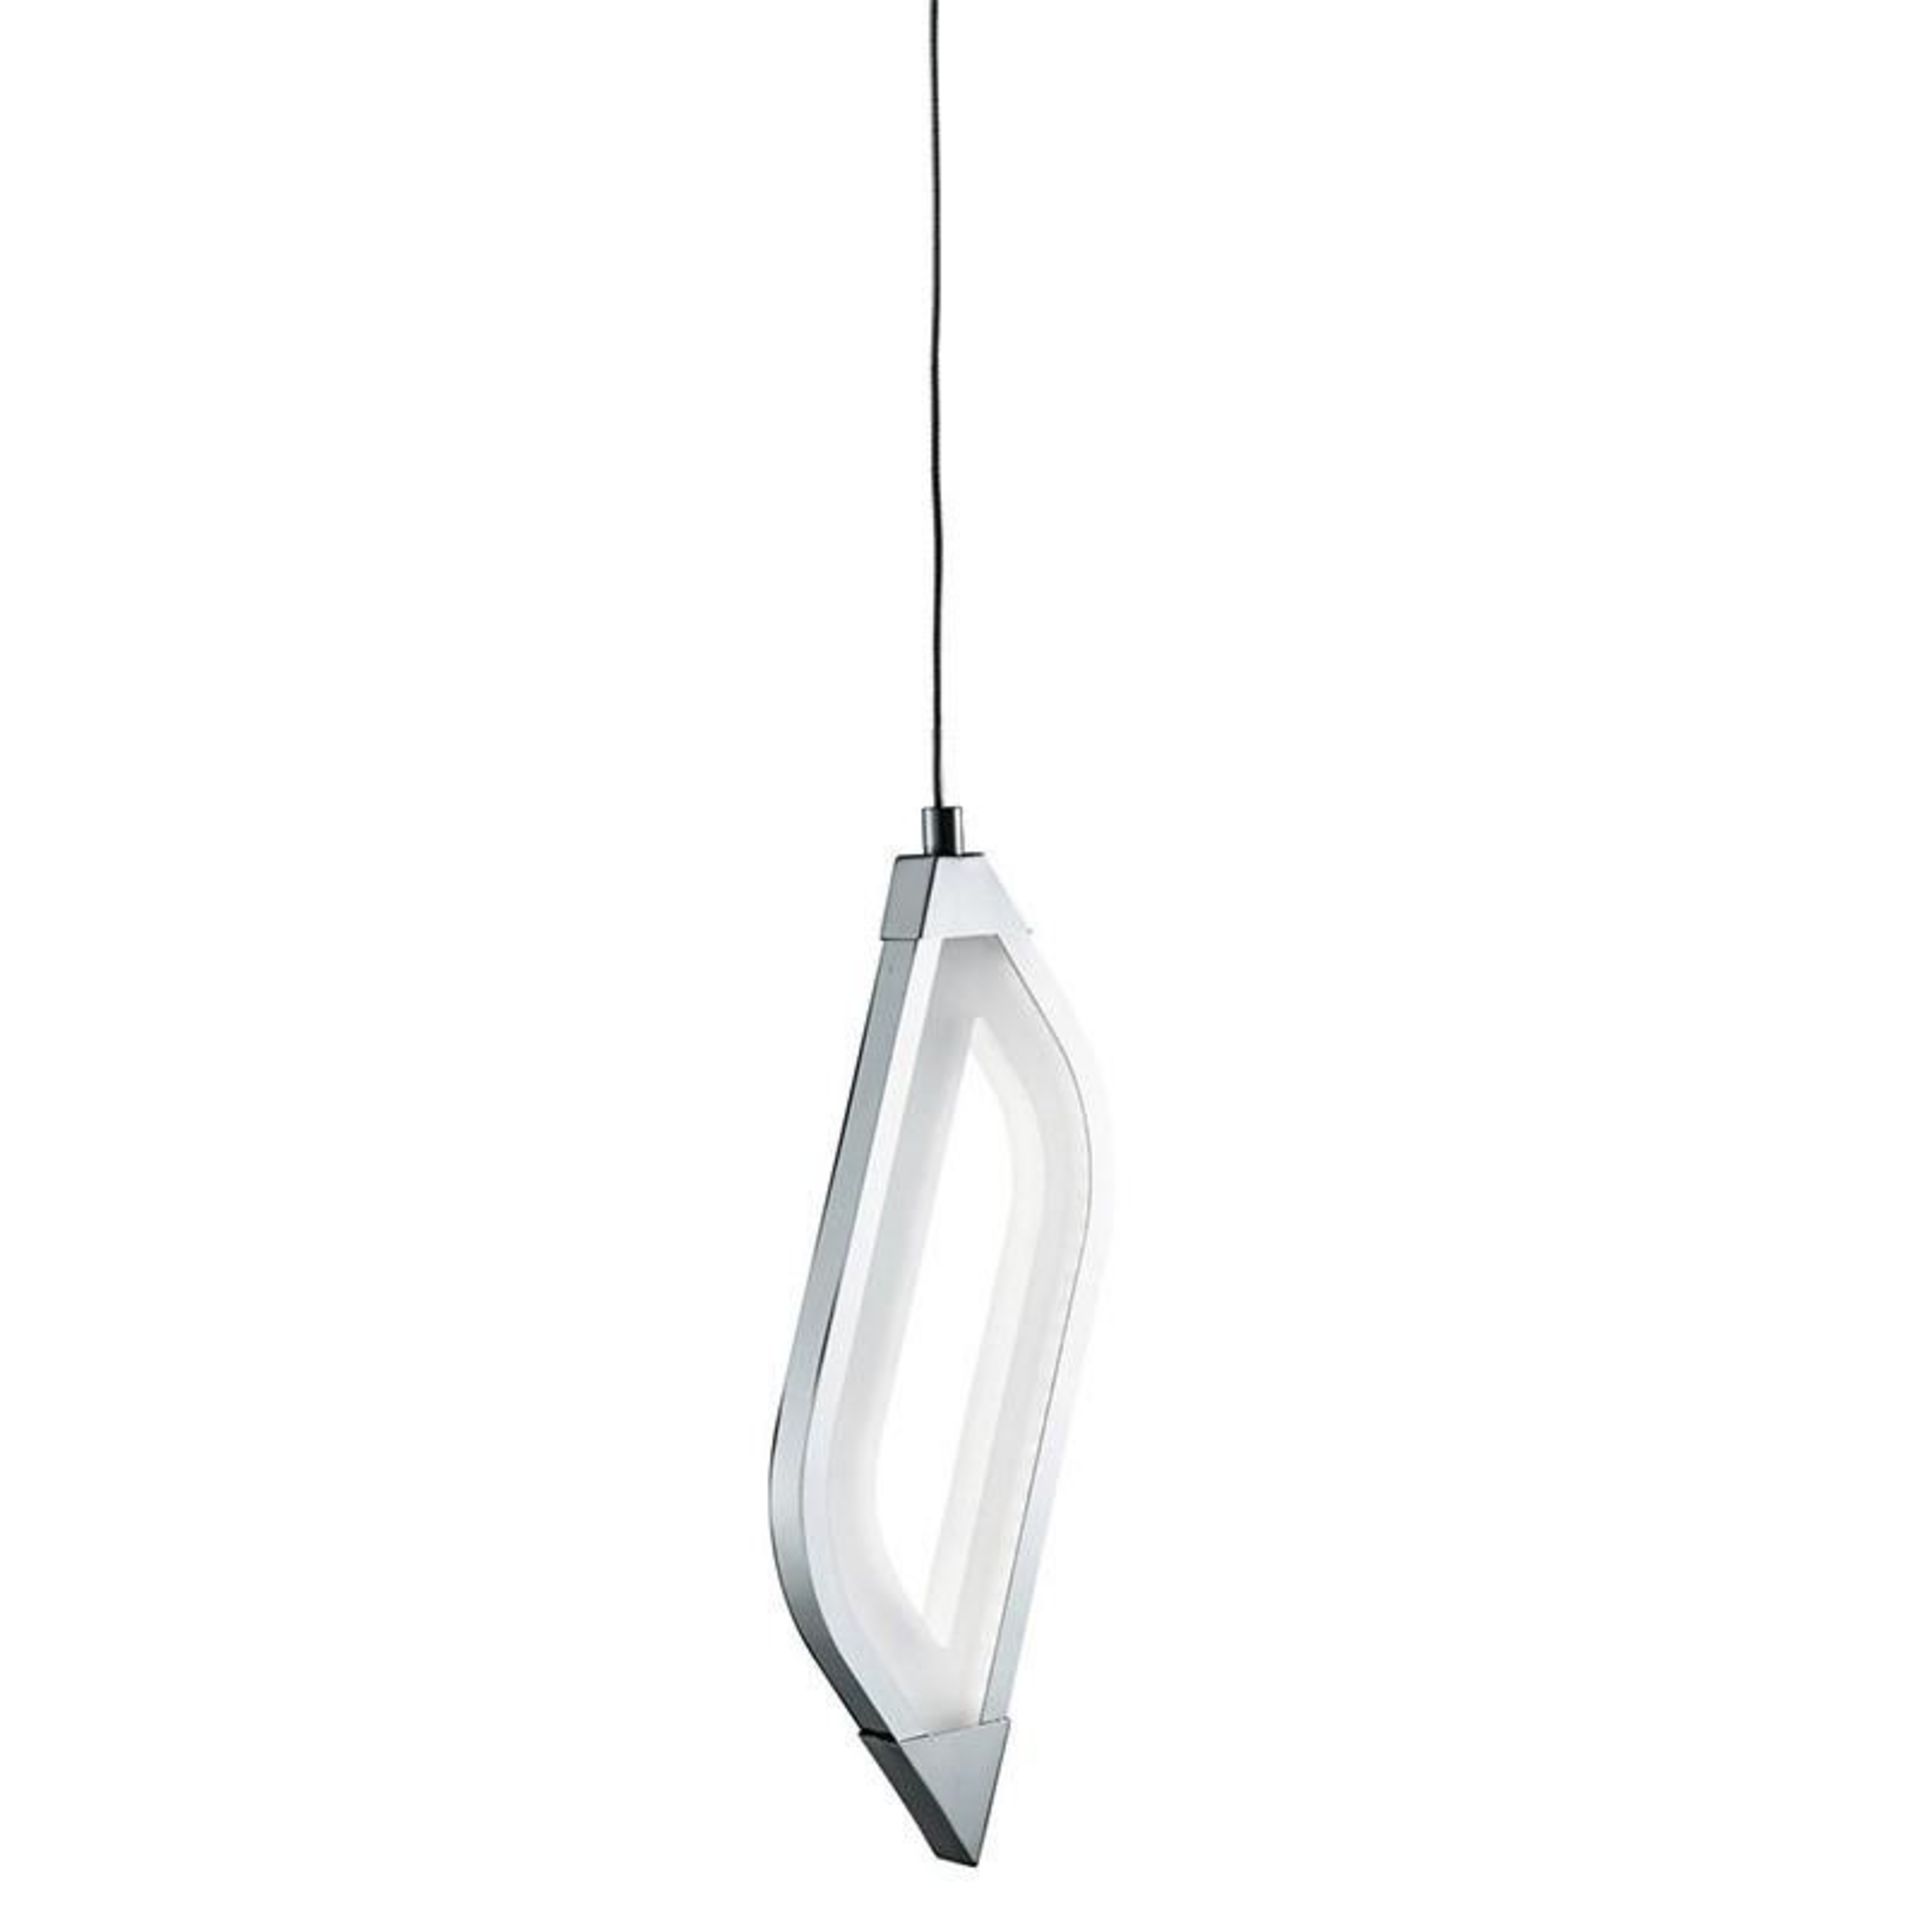 1 x SOLEXA LED Ceiling Pendant In Frosted Acrylics and Chrome Trim - Ex Display Stock - CL298 - Ref - Image 2 of 4